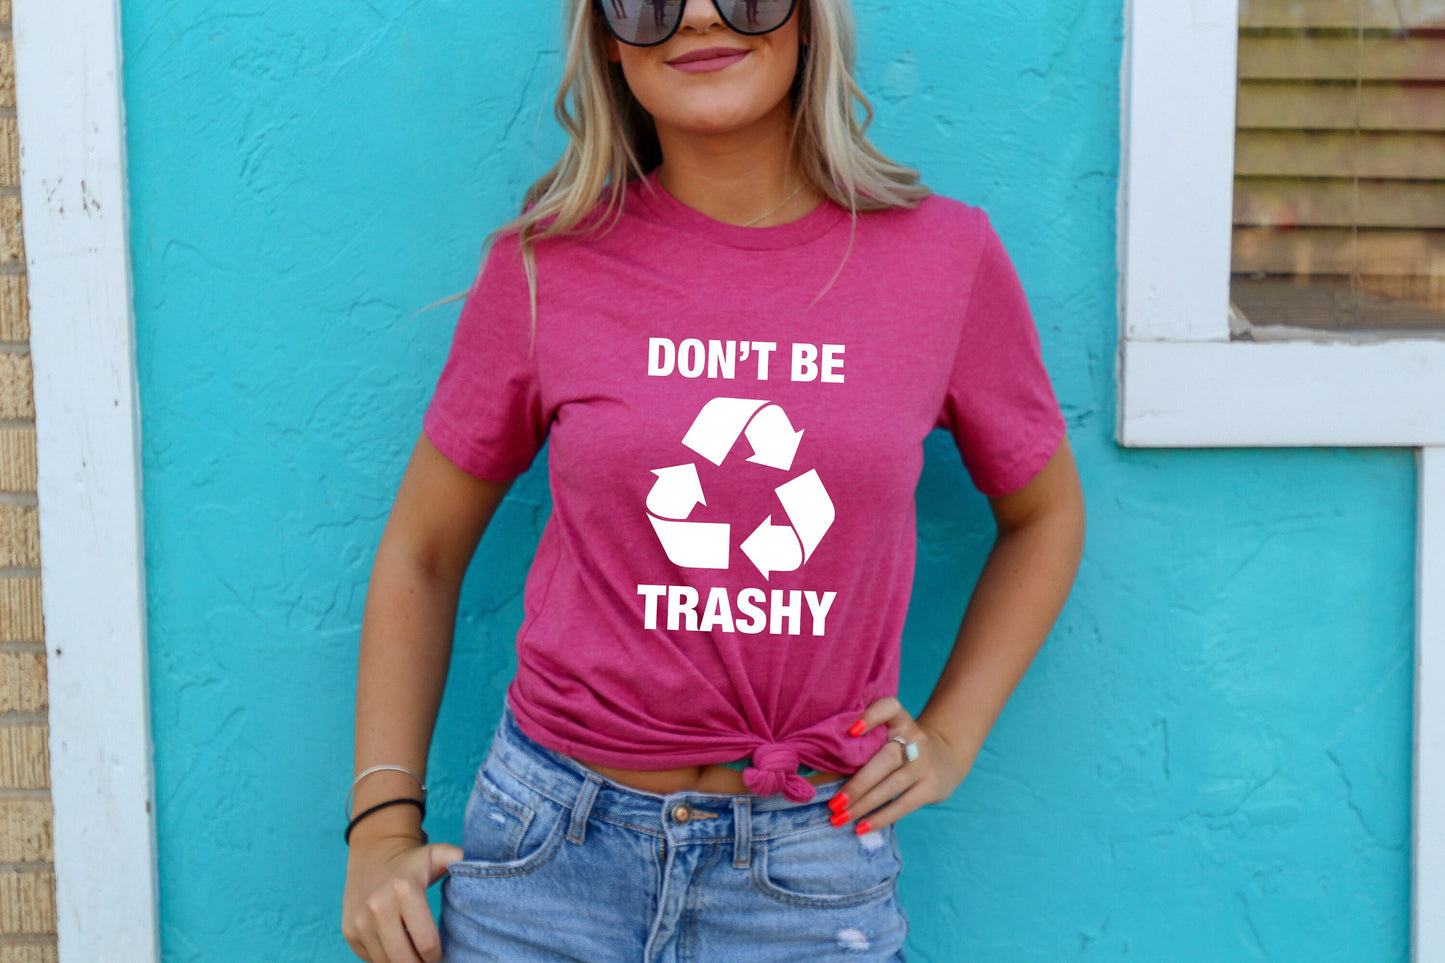 Don't Be Trashy Recycle Earth Day Think Green Ultra Soft Graphic Tee Unisex Soft Tee T-shirt for Women or Men